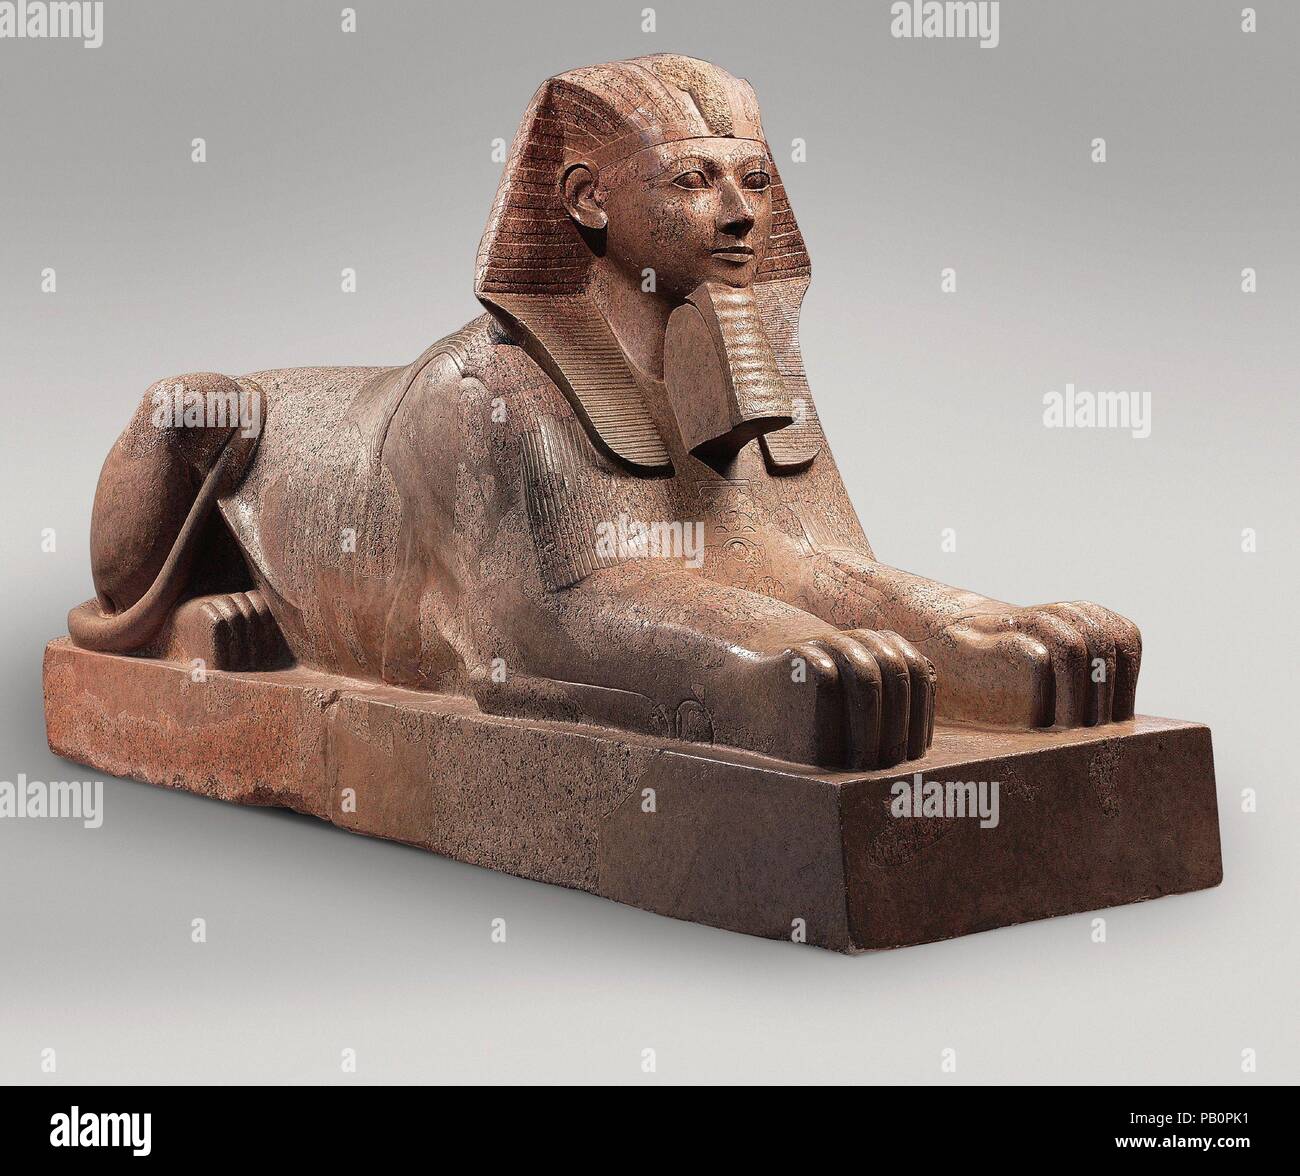 Sphinx of Hatshepsut. Dimensions: H: 164 cm (64 9/16 in.); L: 343 cm (135 1/16 in.); Wt: 6758.6 kg (14900  lb.). Dynasty: Dynasty 18. Reign: Joint reign of Hatshepsut and Thutmose III. Date: ca. 1479-1458 B.C..  This colossal sphinx portrays the female pharaoh Hatshepsut with the body of a lion and a human head wearing a nemes headcloth and royal beard.  The sculptor has carefully observed the powerful muscles of the lion as contrasted to the handsome, idealized face of the pharaoh. It was one of at least six granite sphinxes that stood in Hatshepsut's mortuary temple at Deir el-Bahri.  Smashe Stock Photo